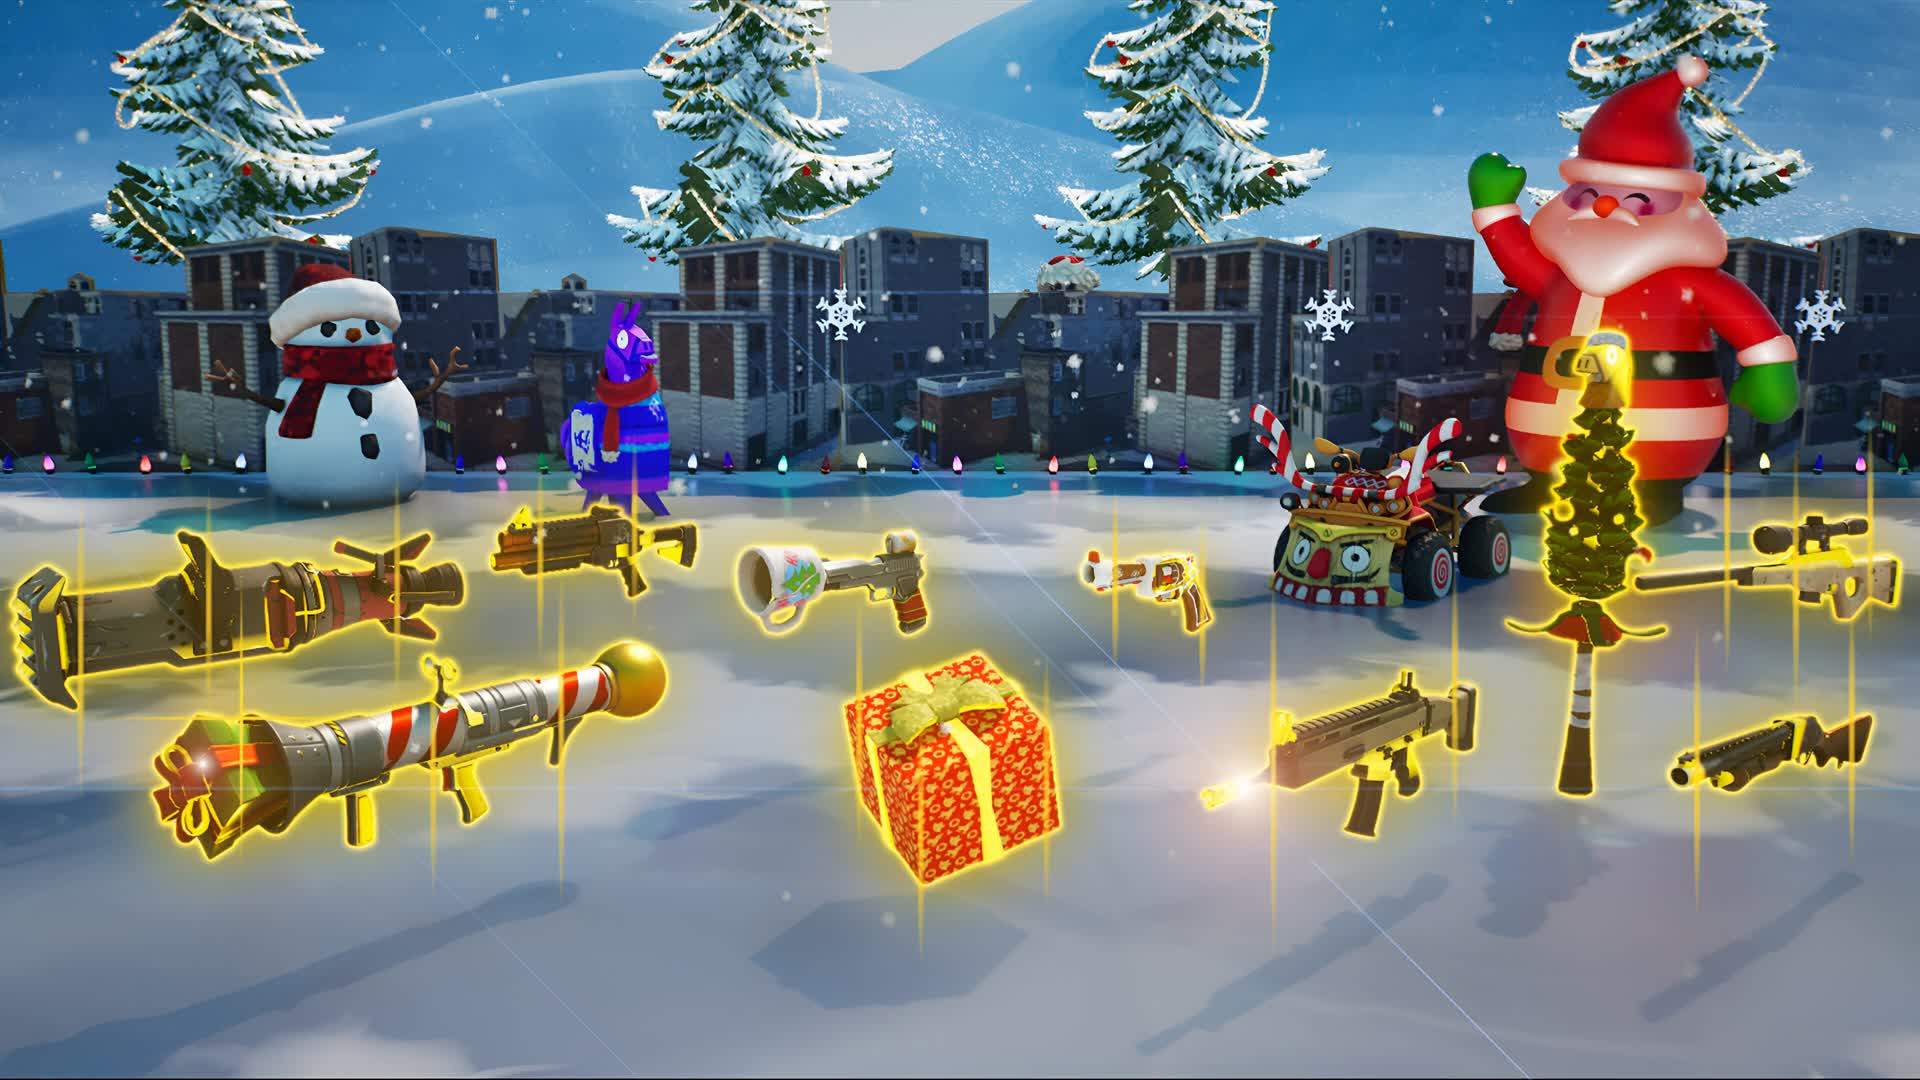 ❄️ CHRISTMAS Tilted Zone Wars 🎅